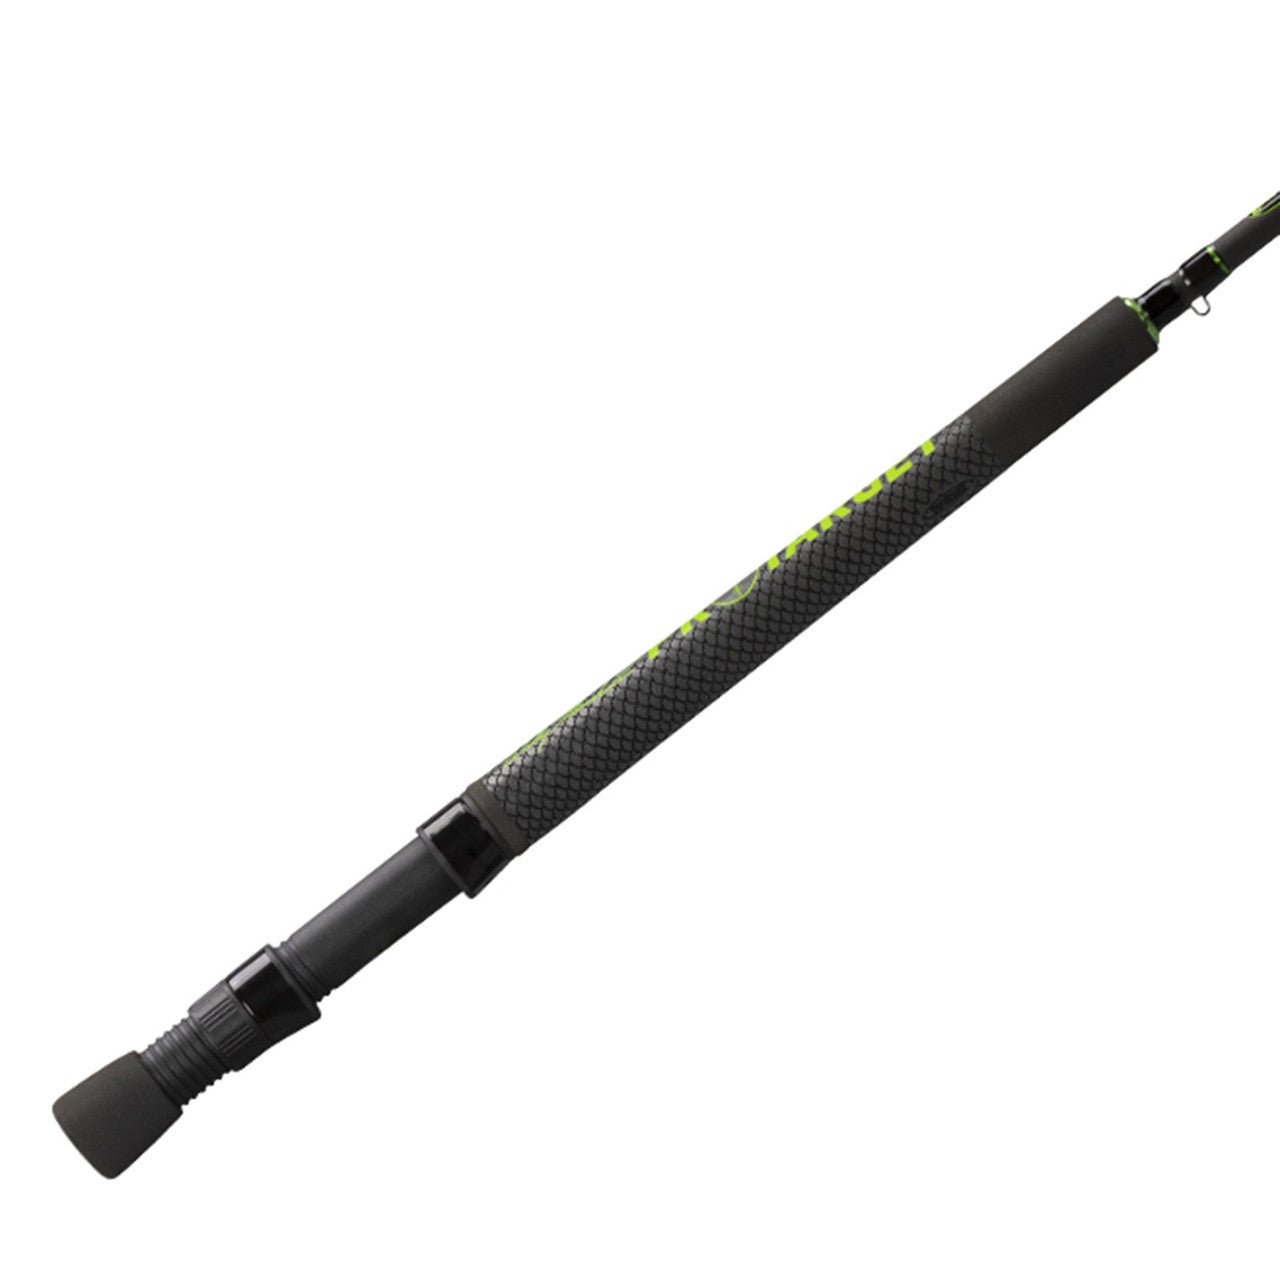 Lew's Wally Marshall Pro Target Crappie Rod